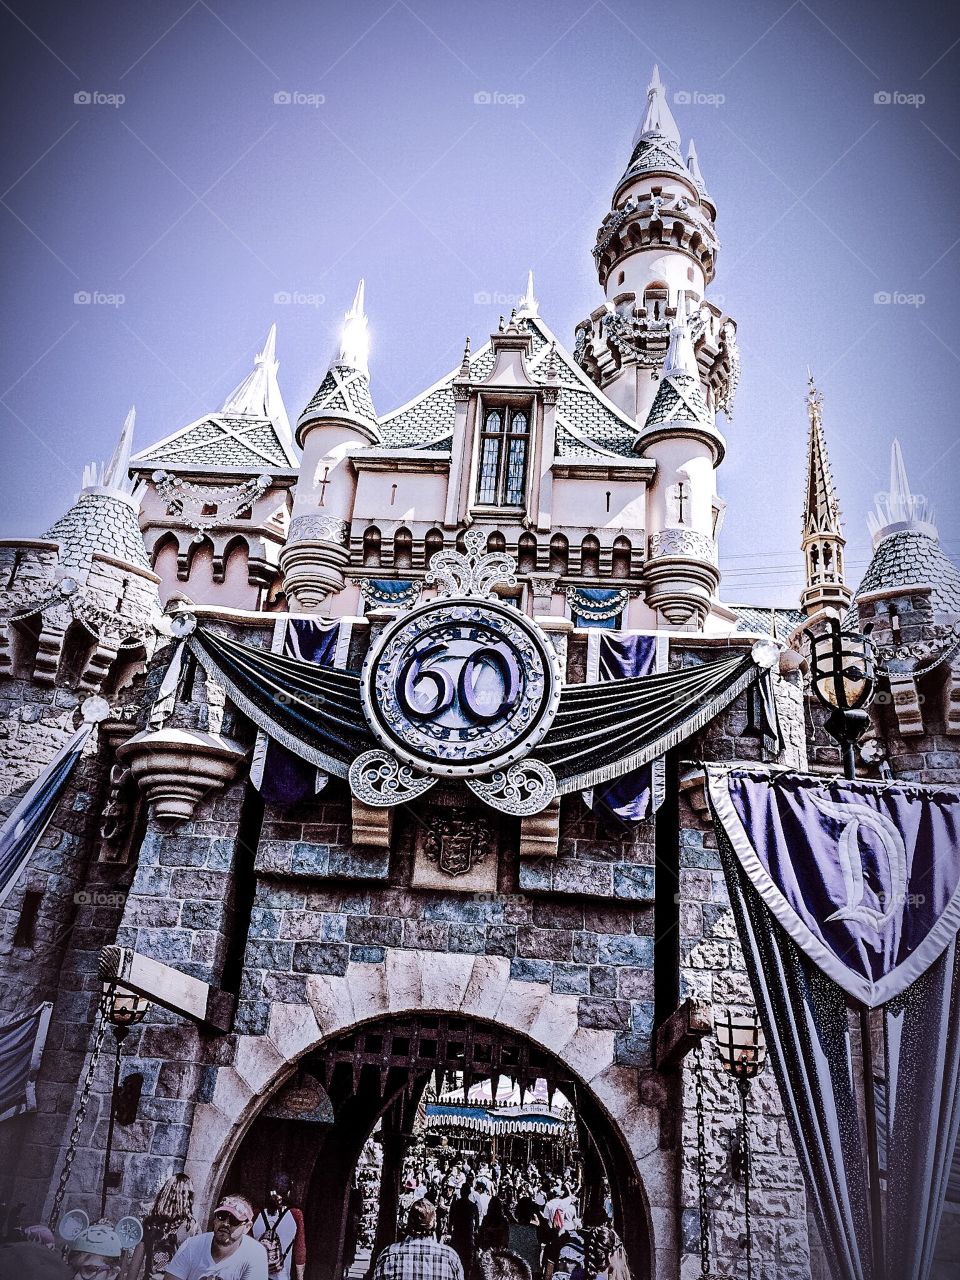 Disneyland's 60th Anniversary Celebration featuring their famous Sleeping Beauty Castle. 